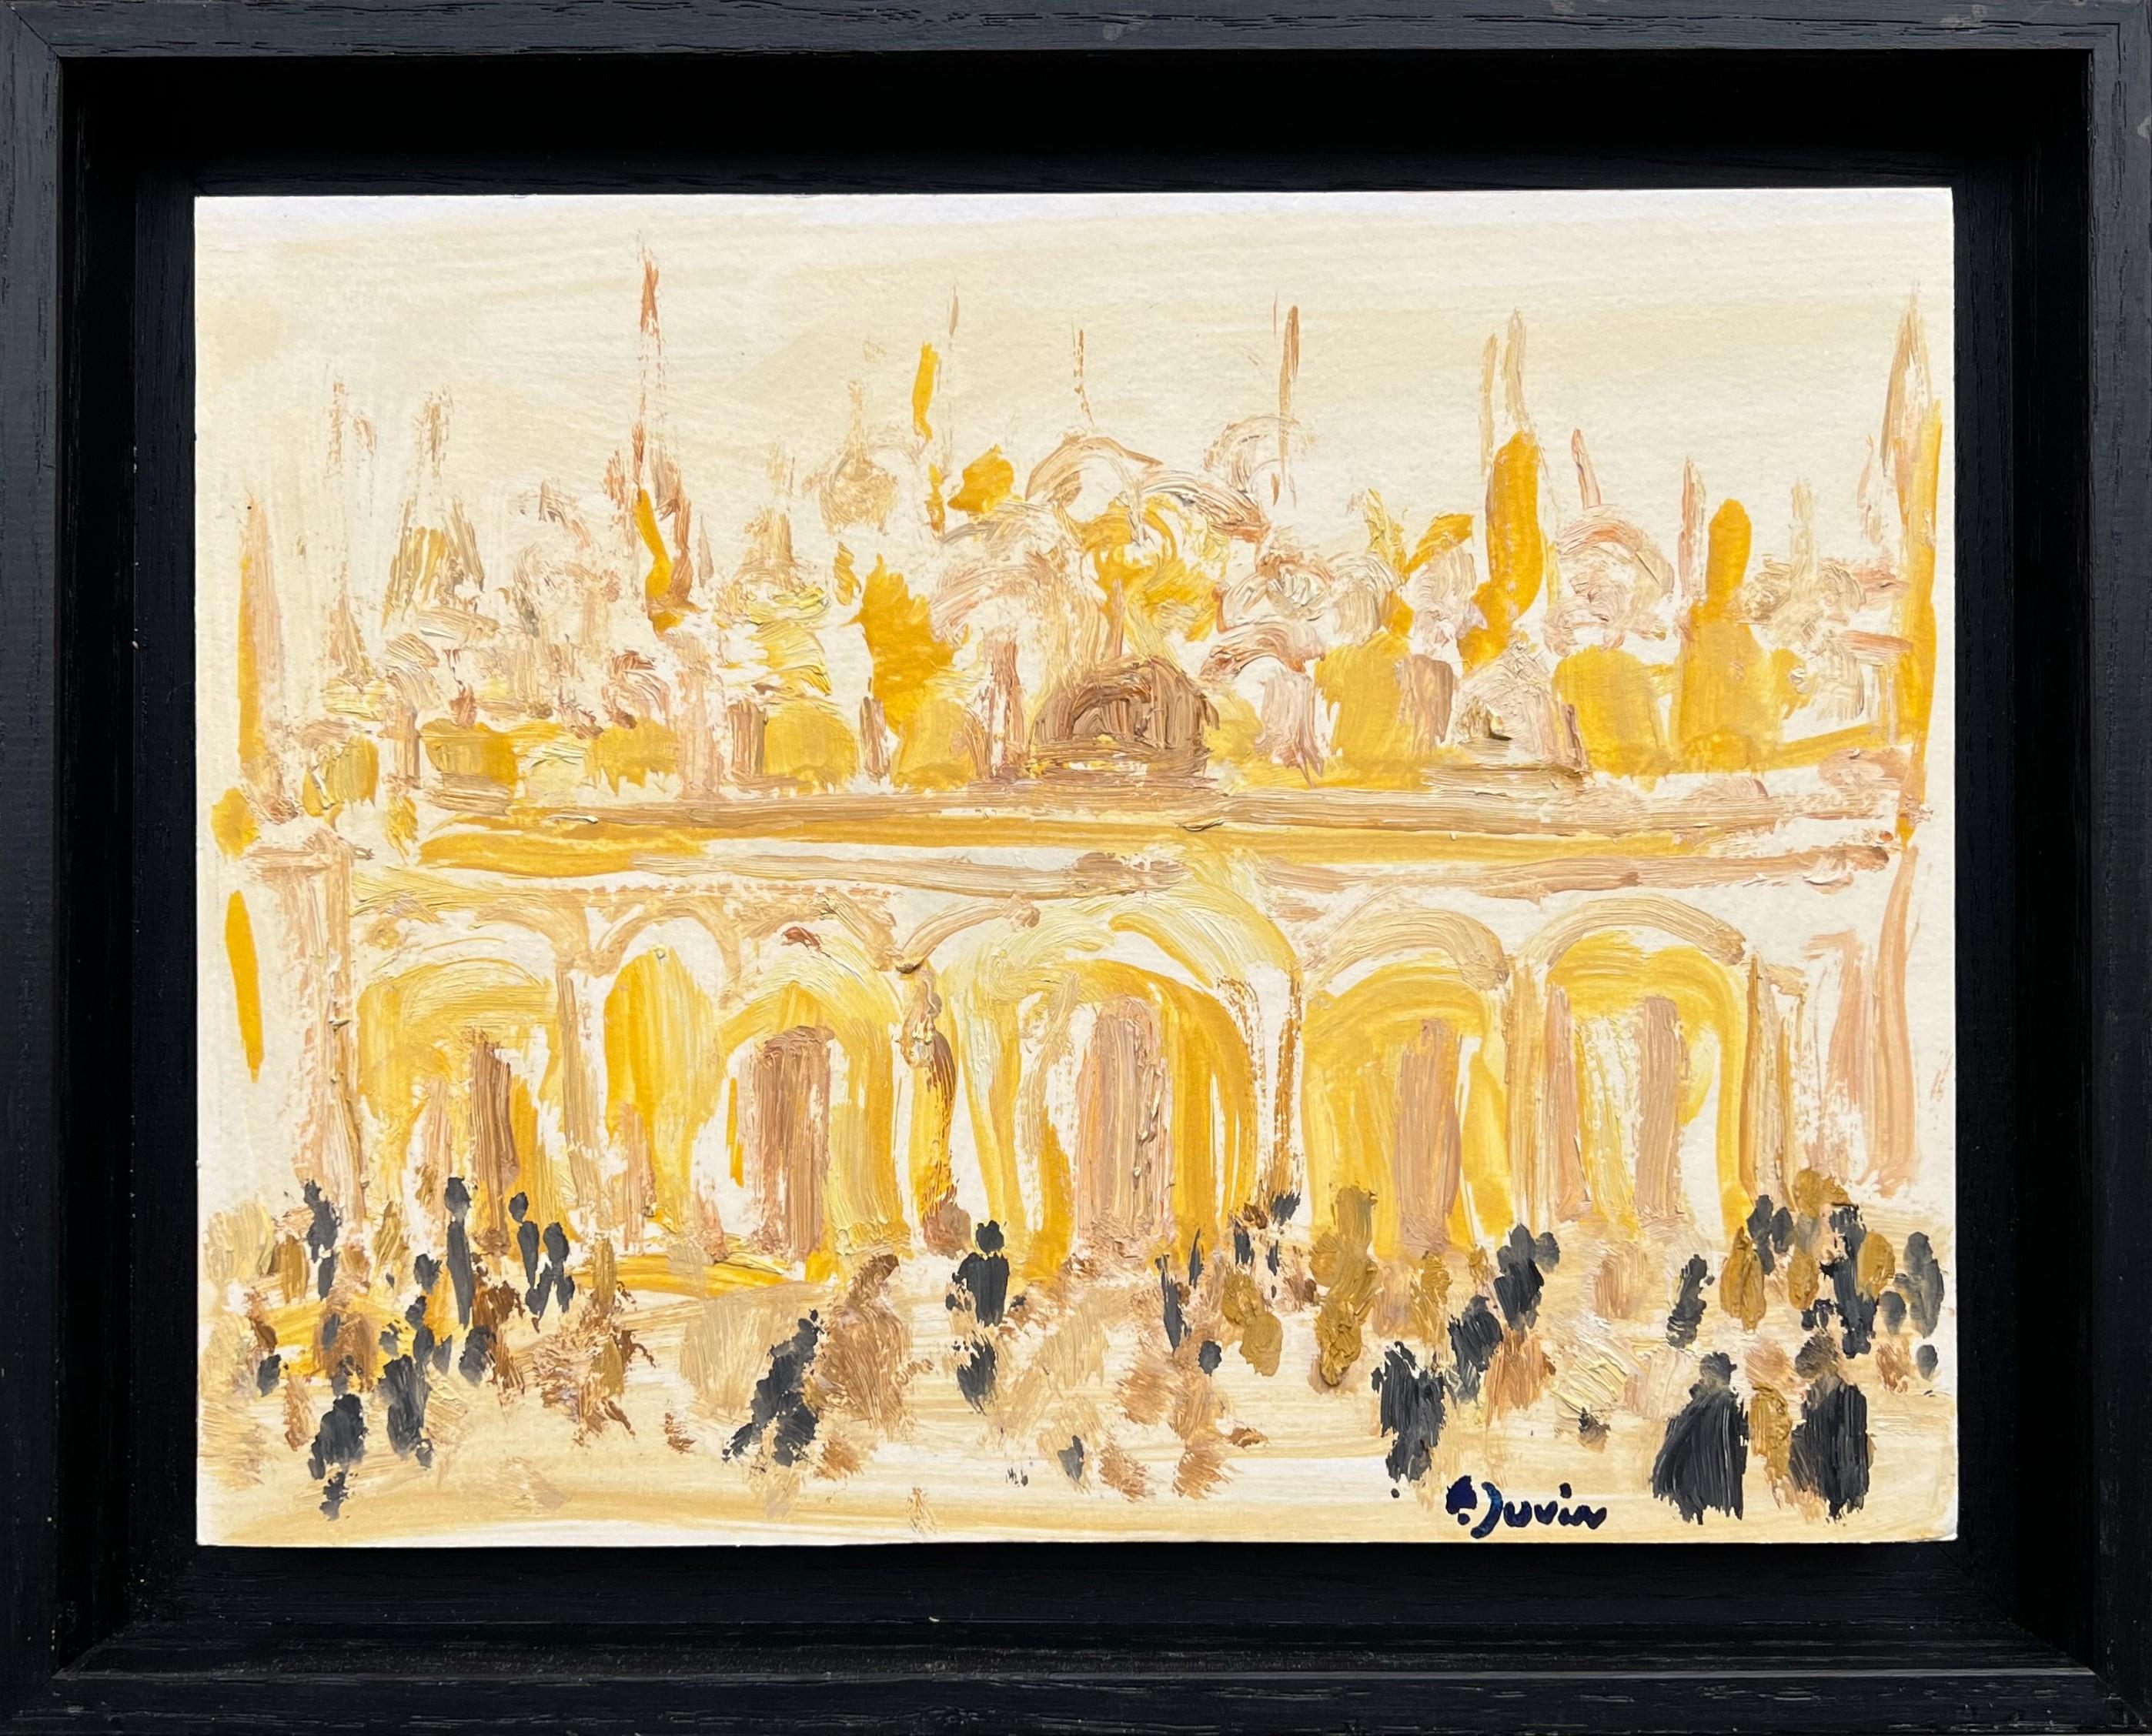 Françoise Juvin - Venice, Piazza San Marco
Reference number FJ142
Framed with a black wood floated frame.
24 x 30 cm frame included (19 x 23 cm without frame)
This work is painted with oil on a paper that is mounted on a board and placed in a made